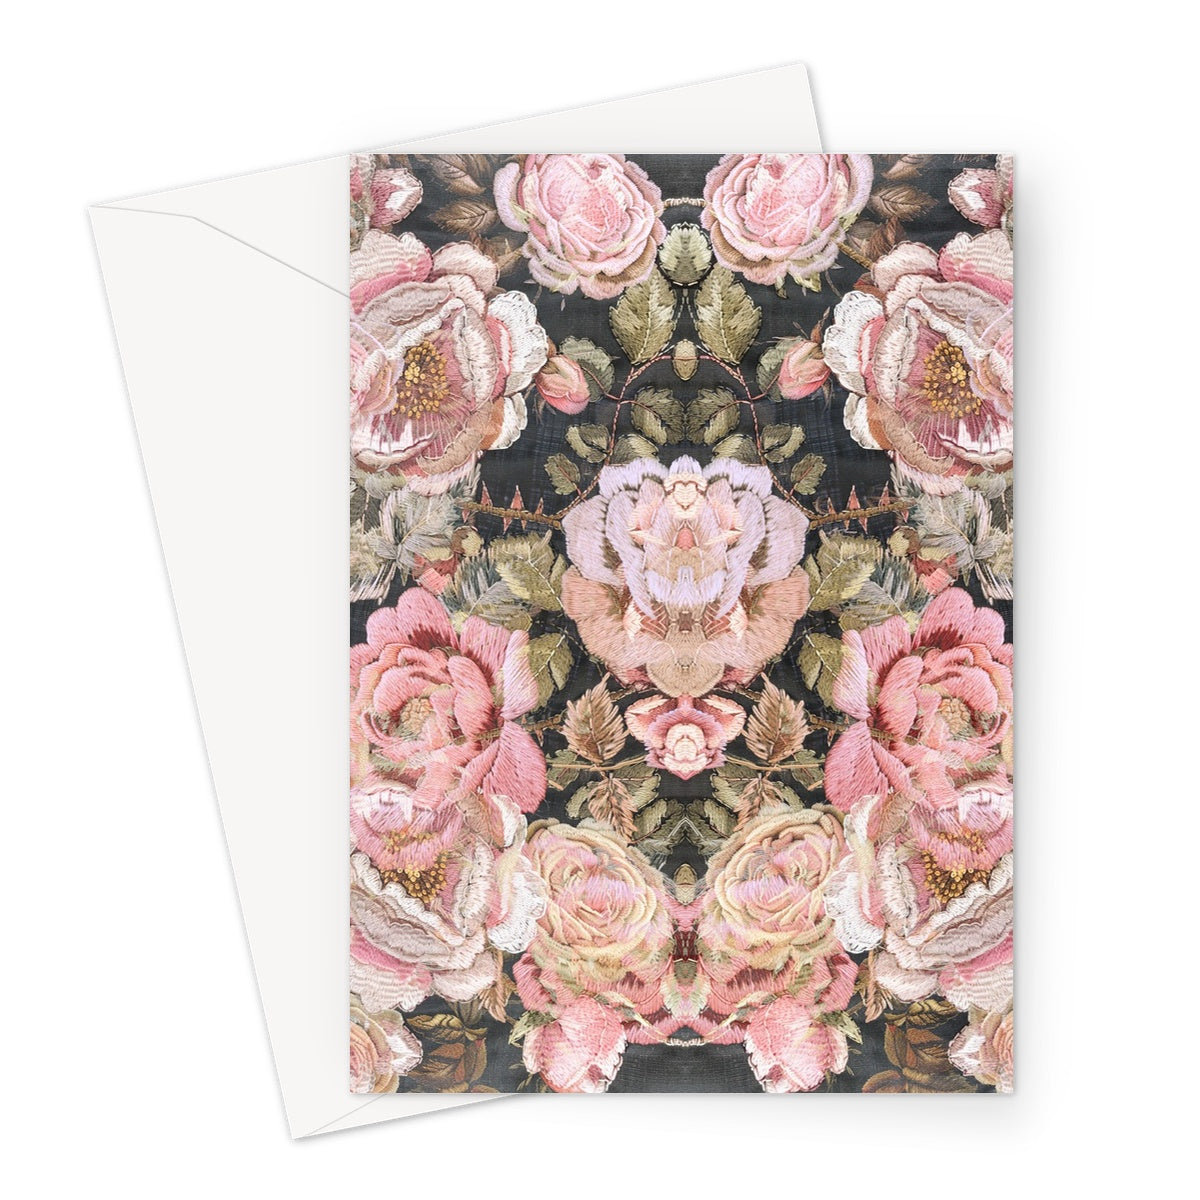 It's all Roses Greeting Card - Starseed Designs Inc.